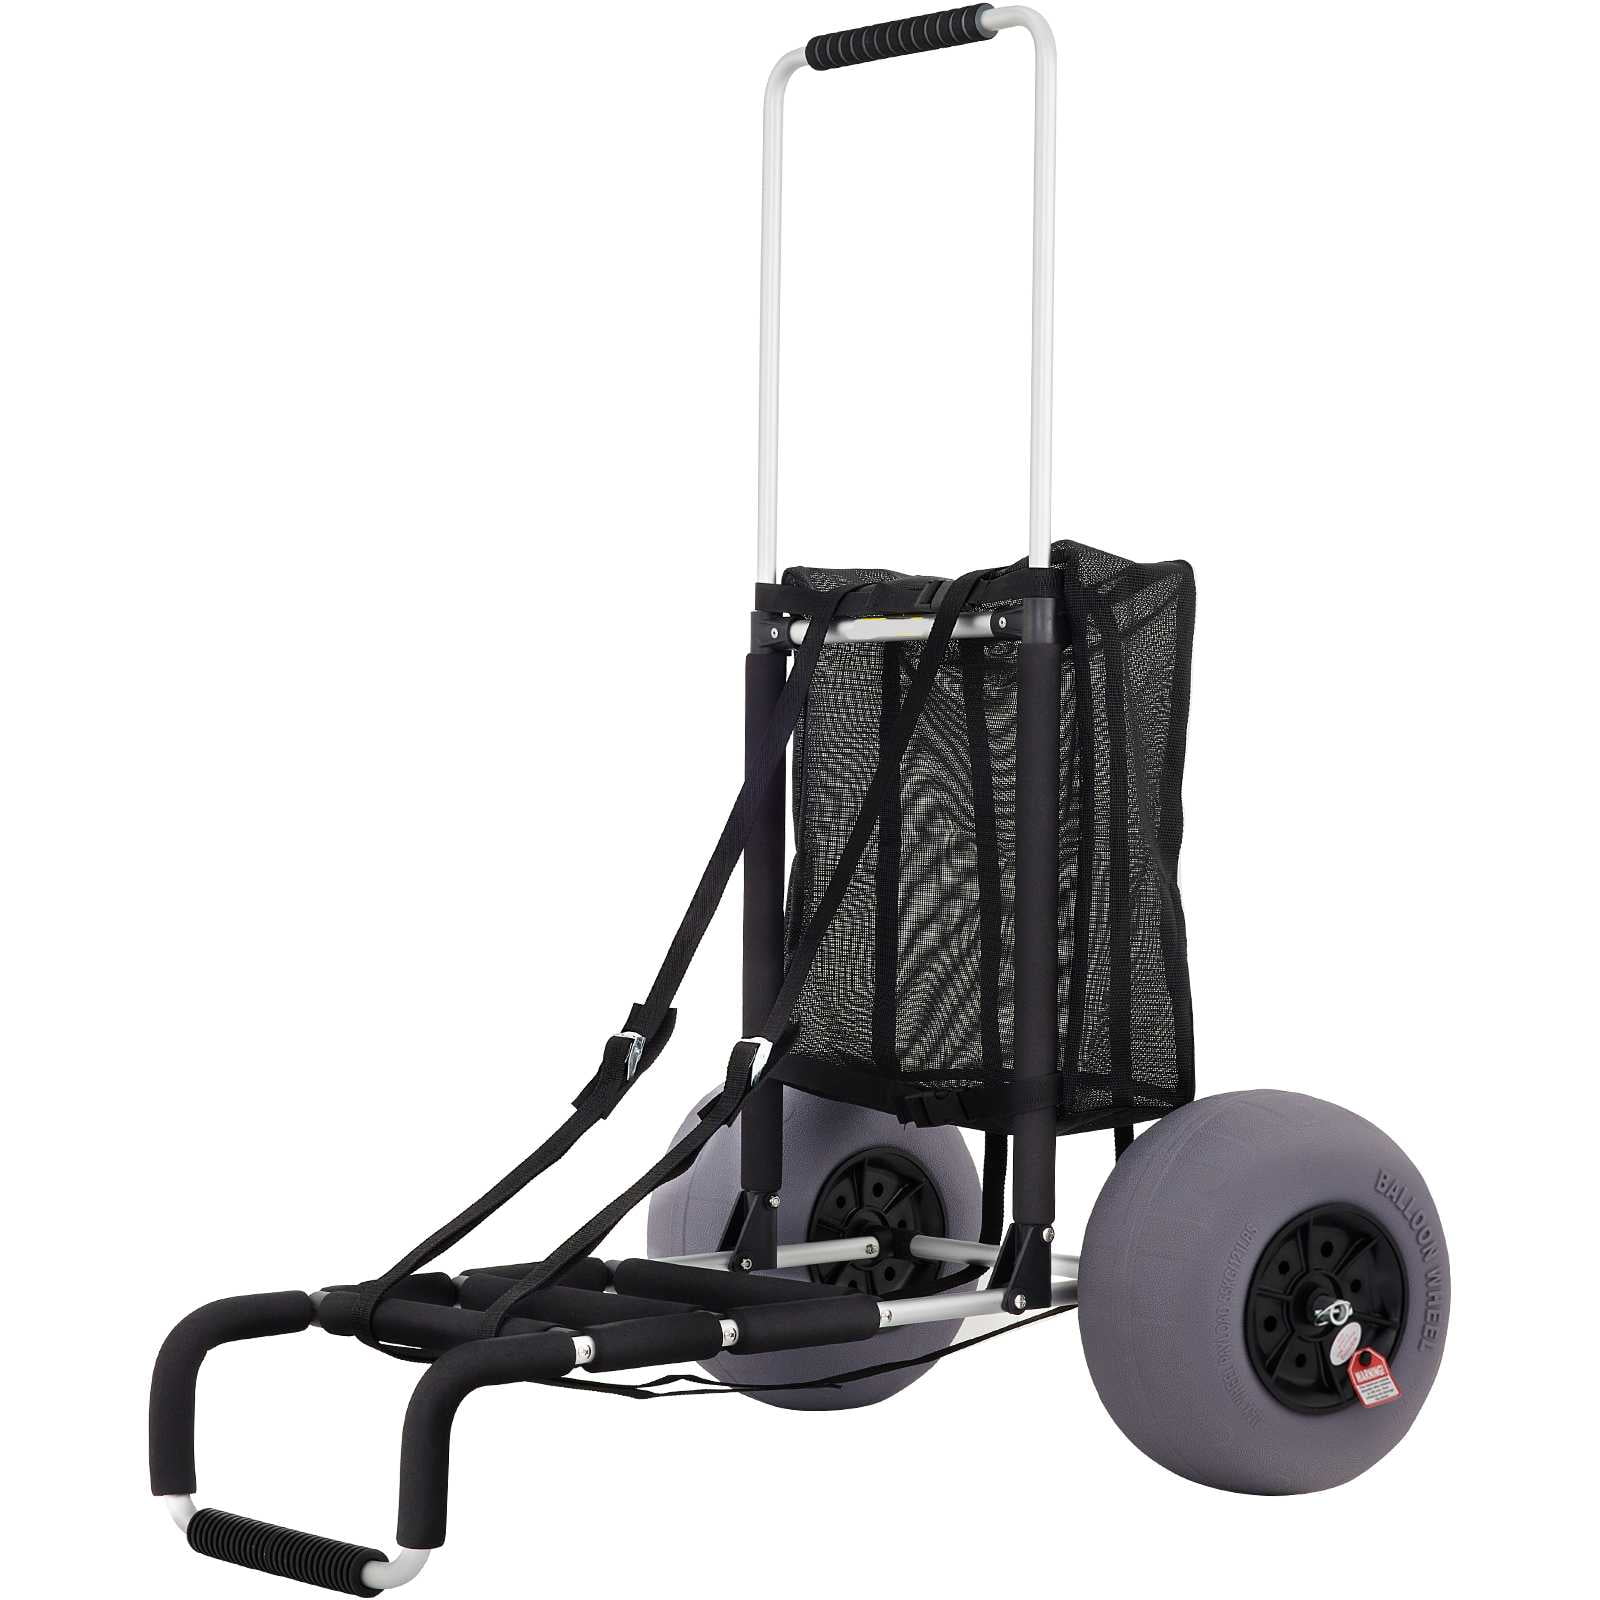 BENTISM Beach Carts for The Sand 165LBS Capacity Adjustable Handle